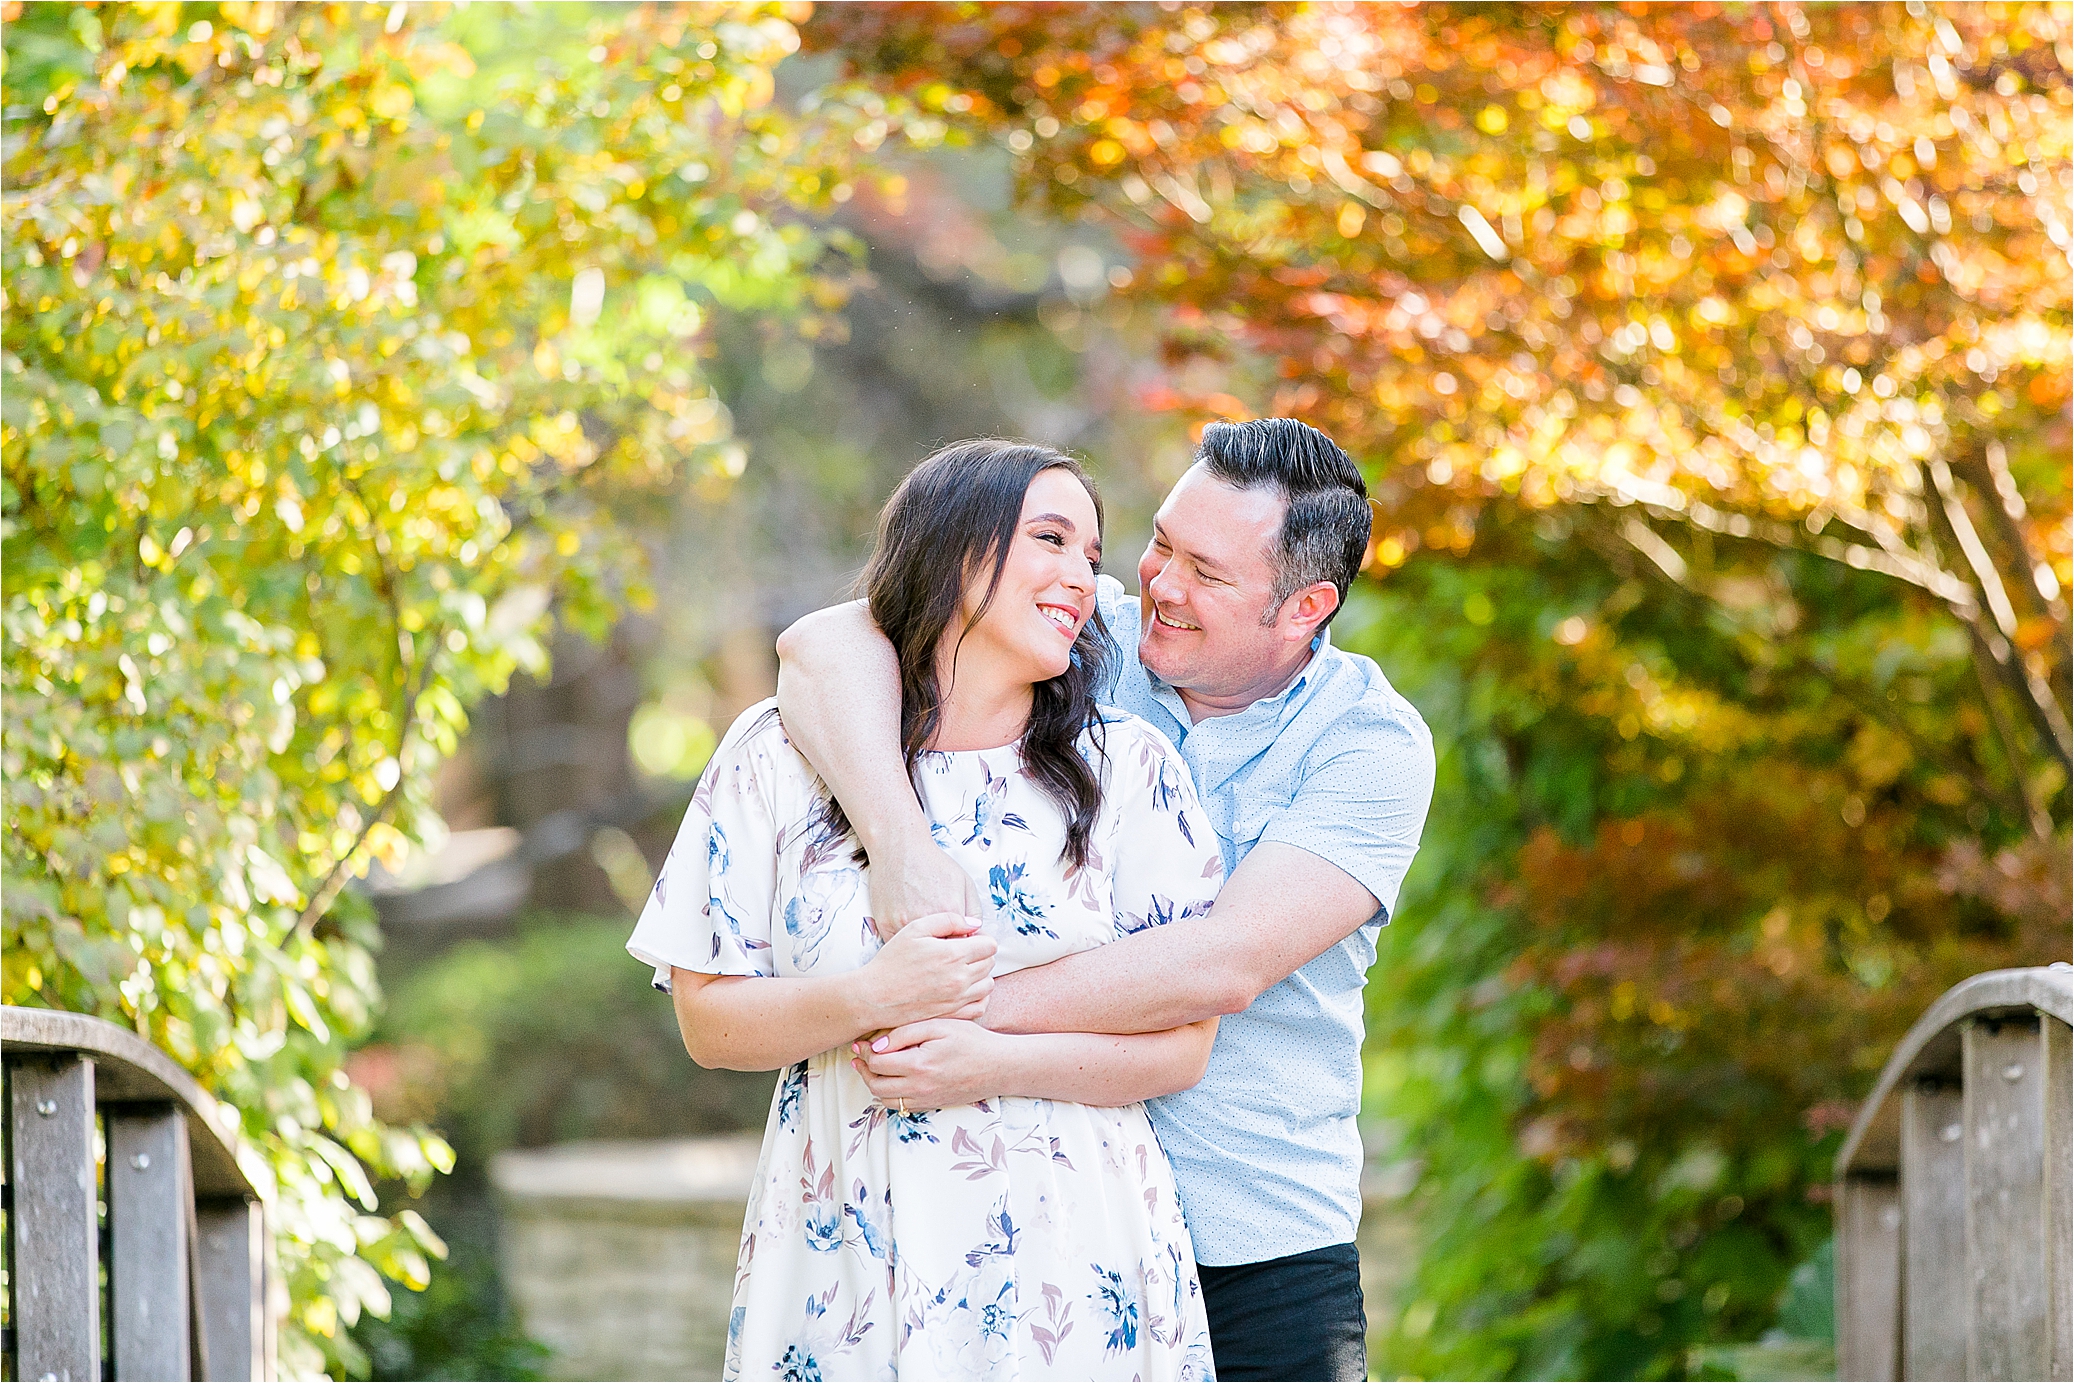 A bride to be being bear-hugged by her fiance on a sunny, fall day at The Fort Worth Botanic Garden during their DFW Engagement Session with Jillian Hogan 